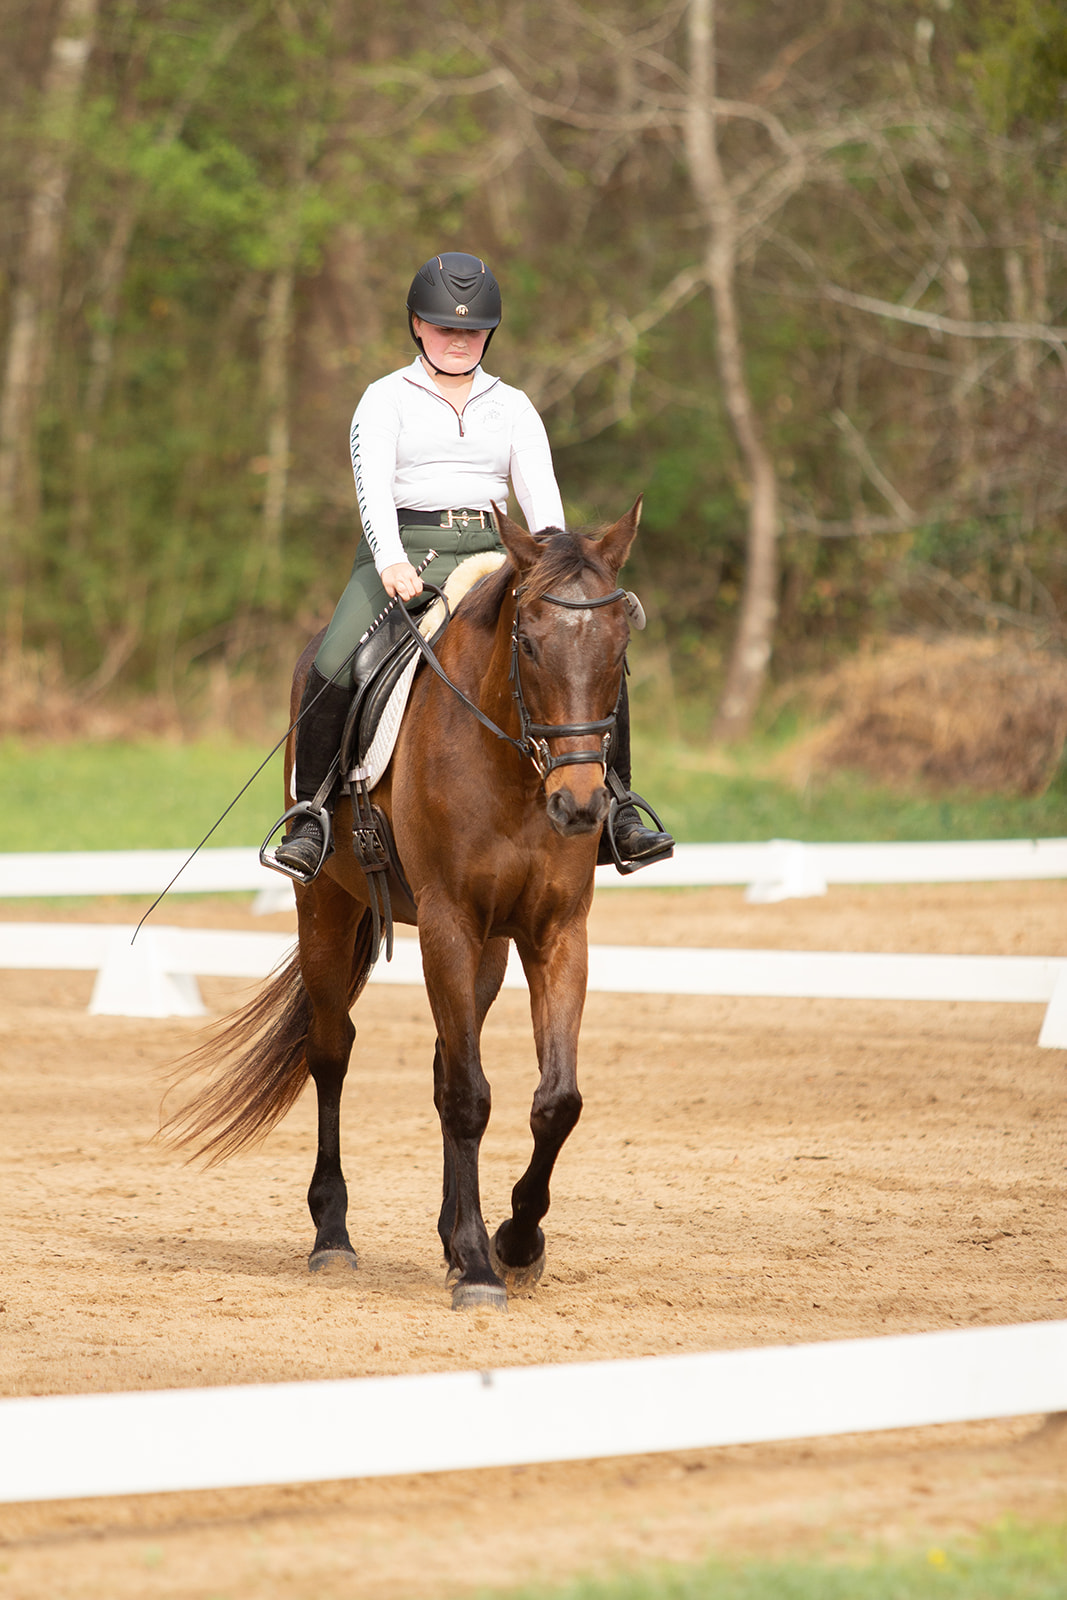 Equestrian competing in Dressage during Eventing competition in Tallahassee, FL at Mahan Farm. calicoandchrome.com